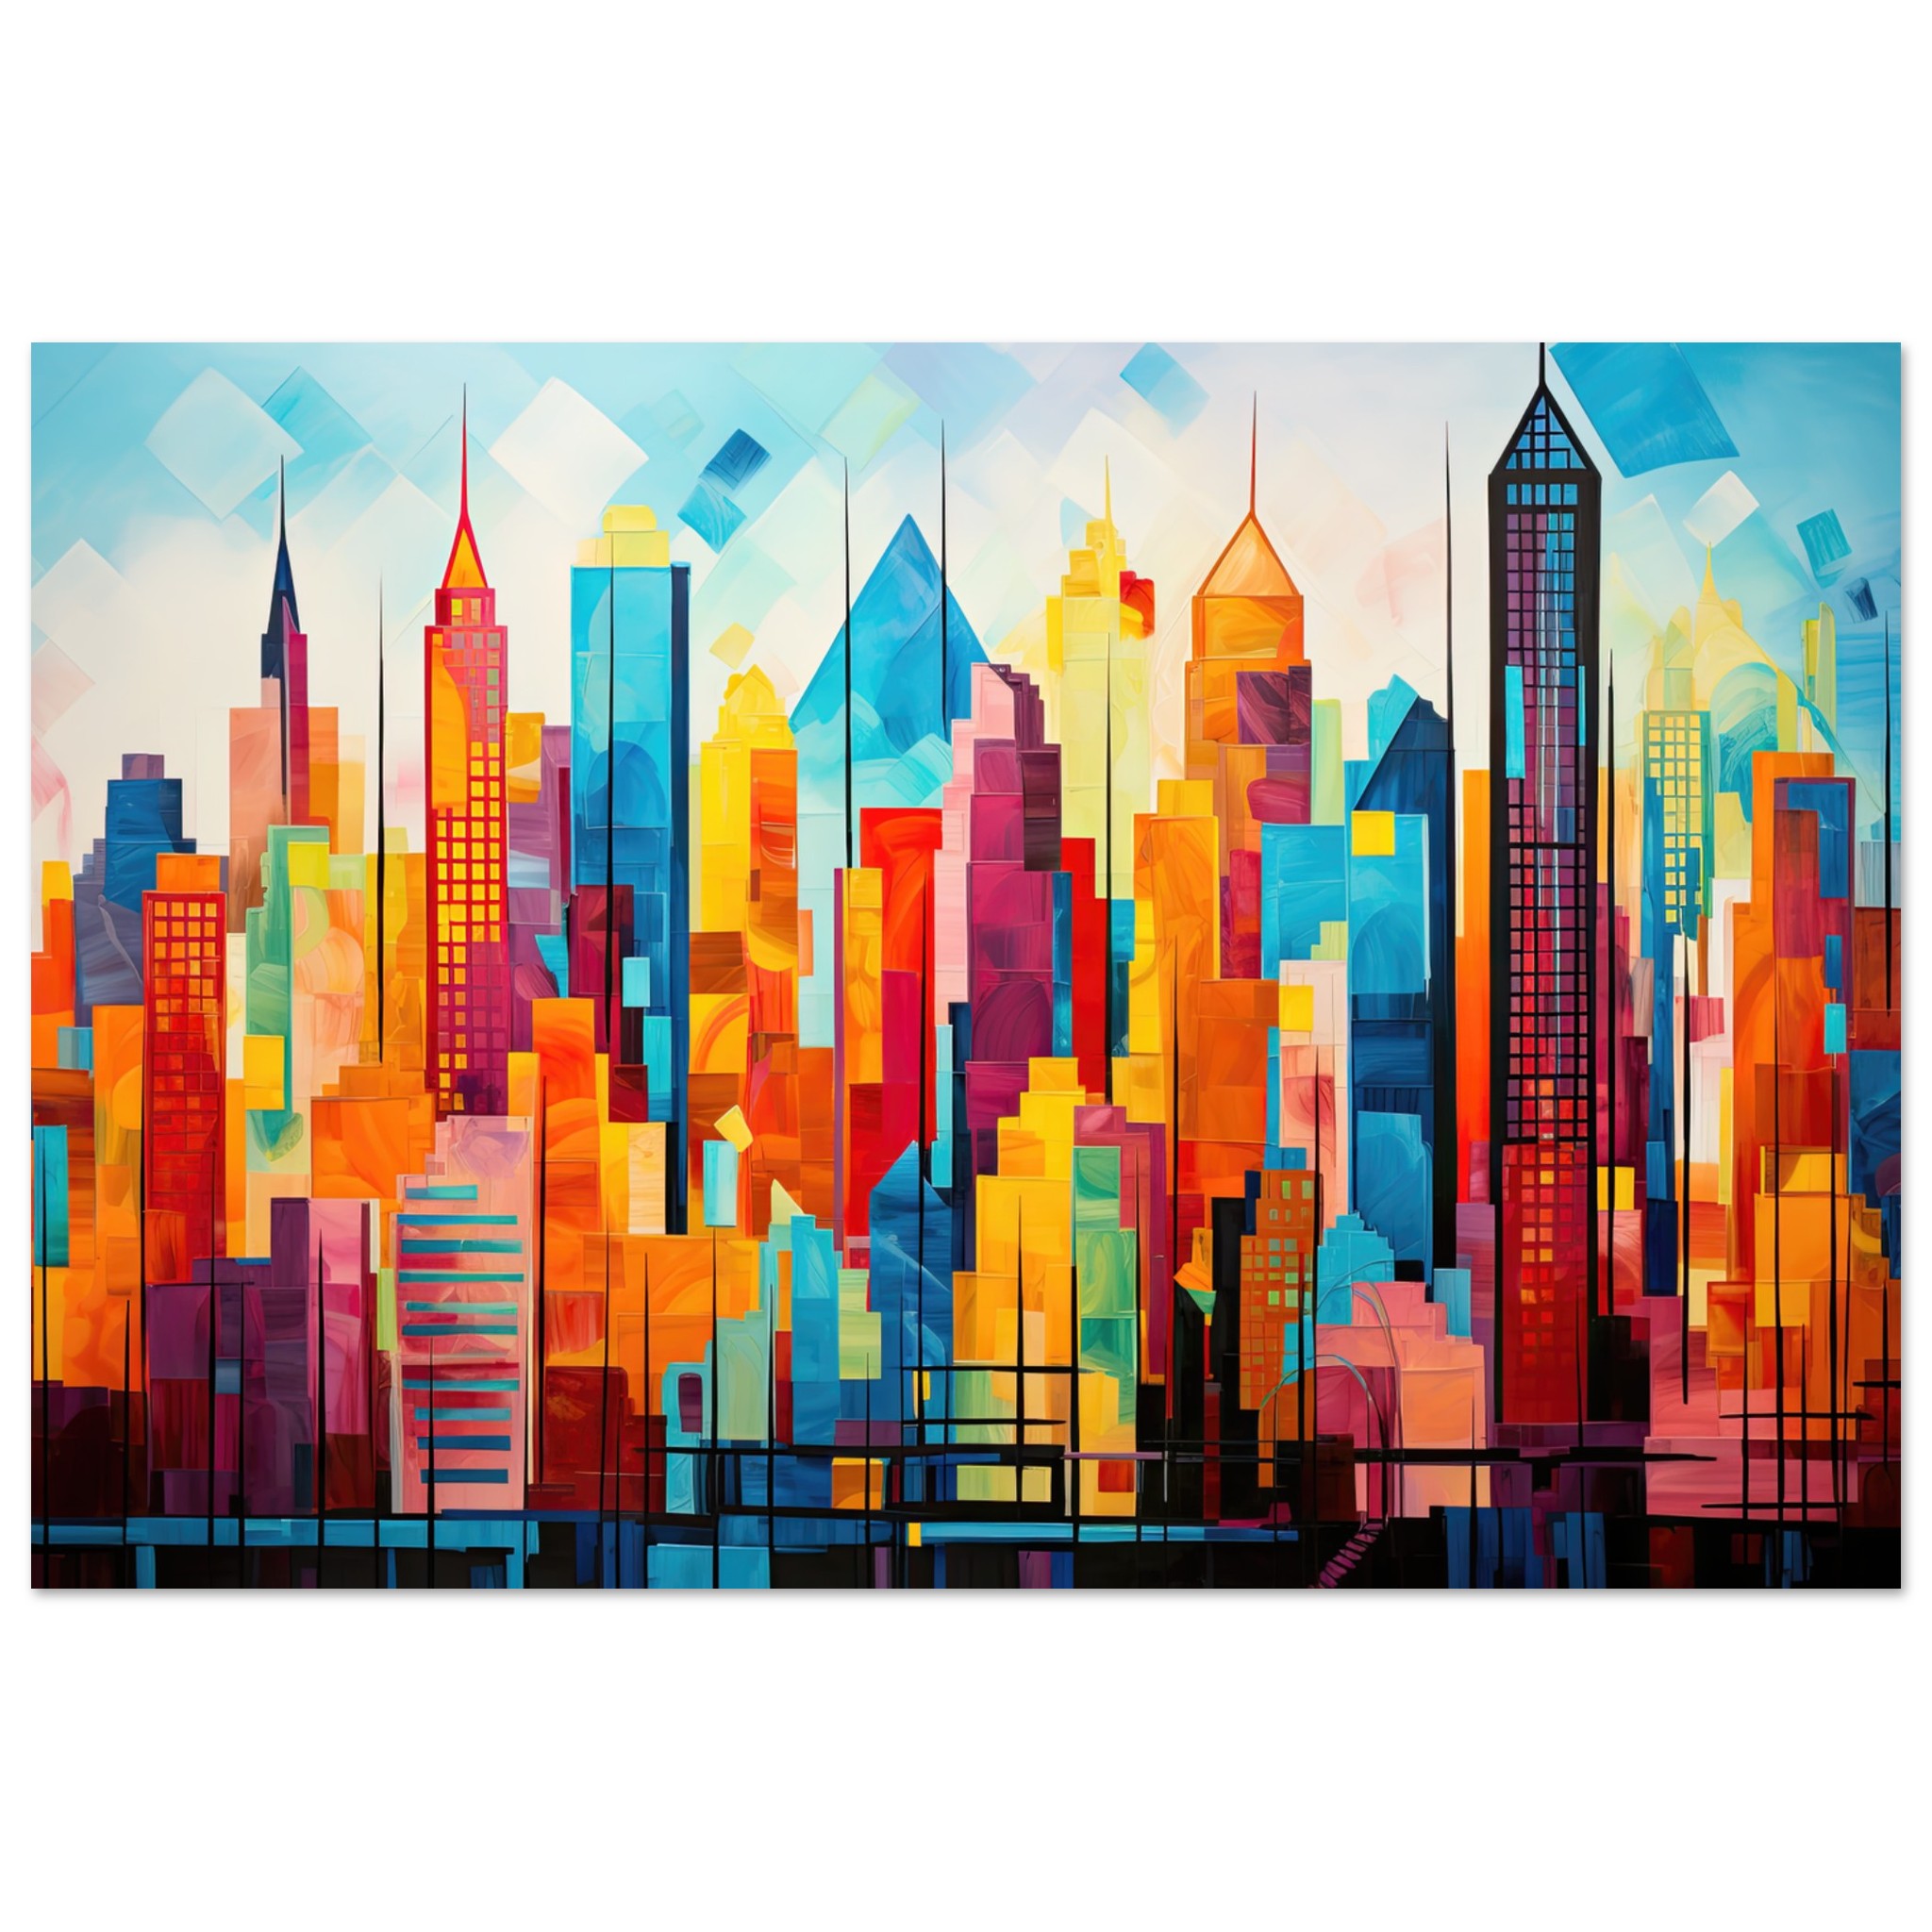 Colorful Abstract Cityscape Painted – Poster – 60×90 cm / 24×36″